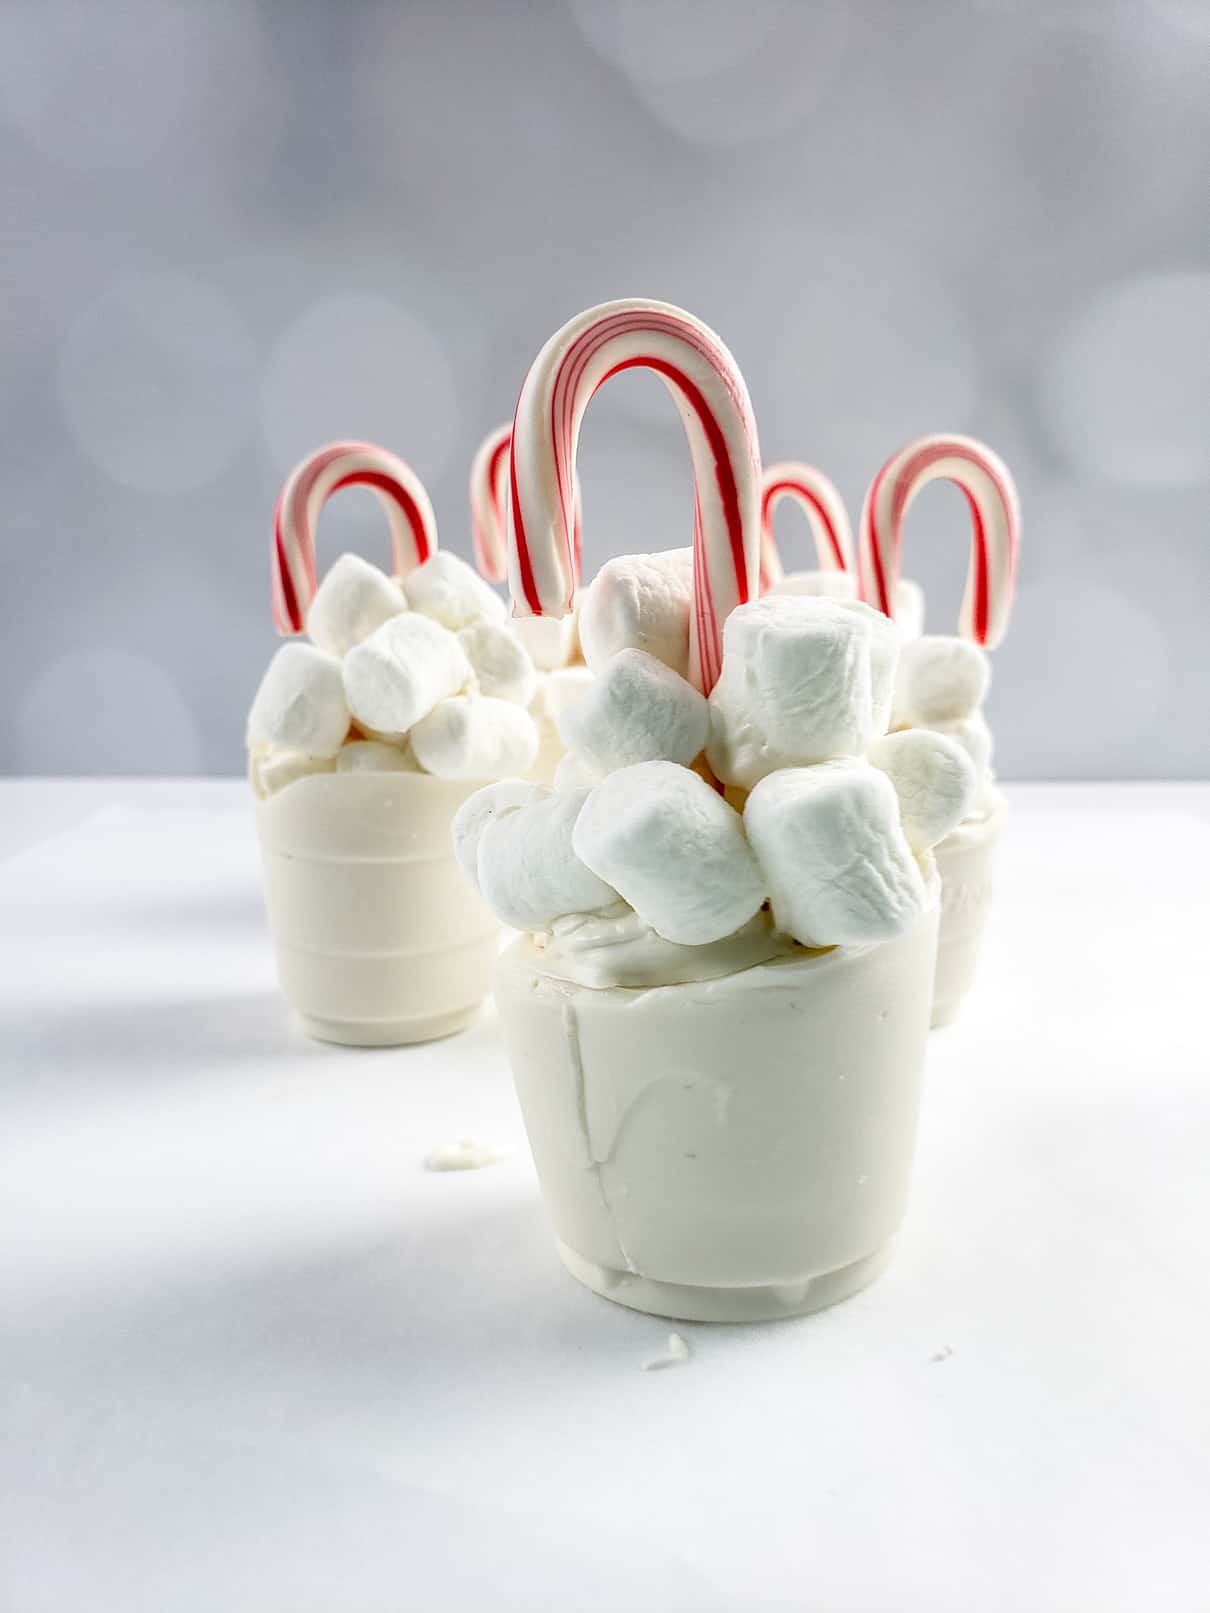 Topping off hot chocolate bombs with marshmallows and candy canes